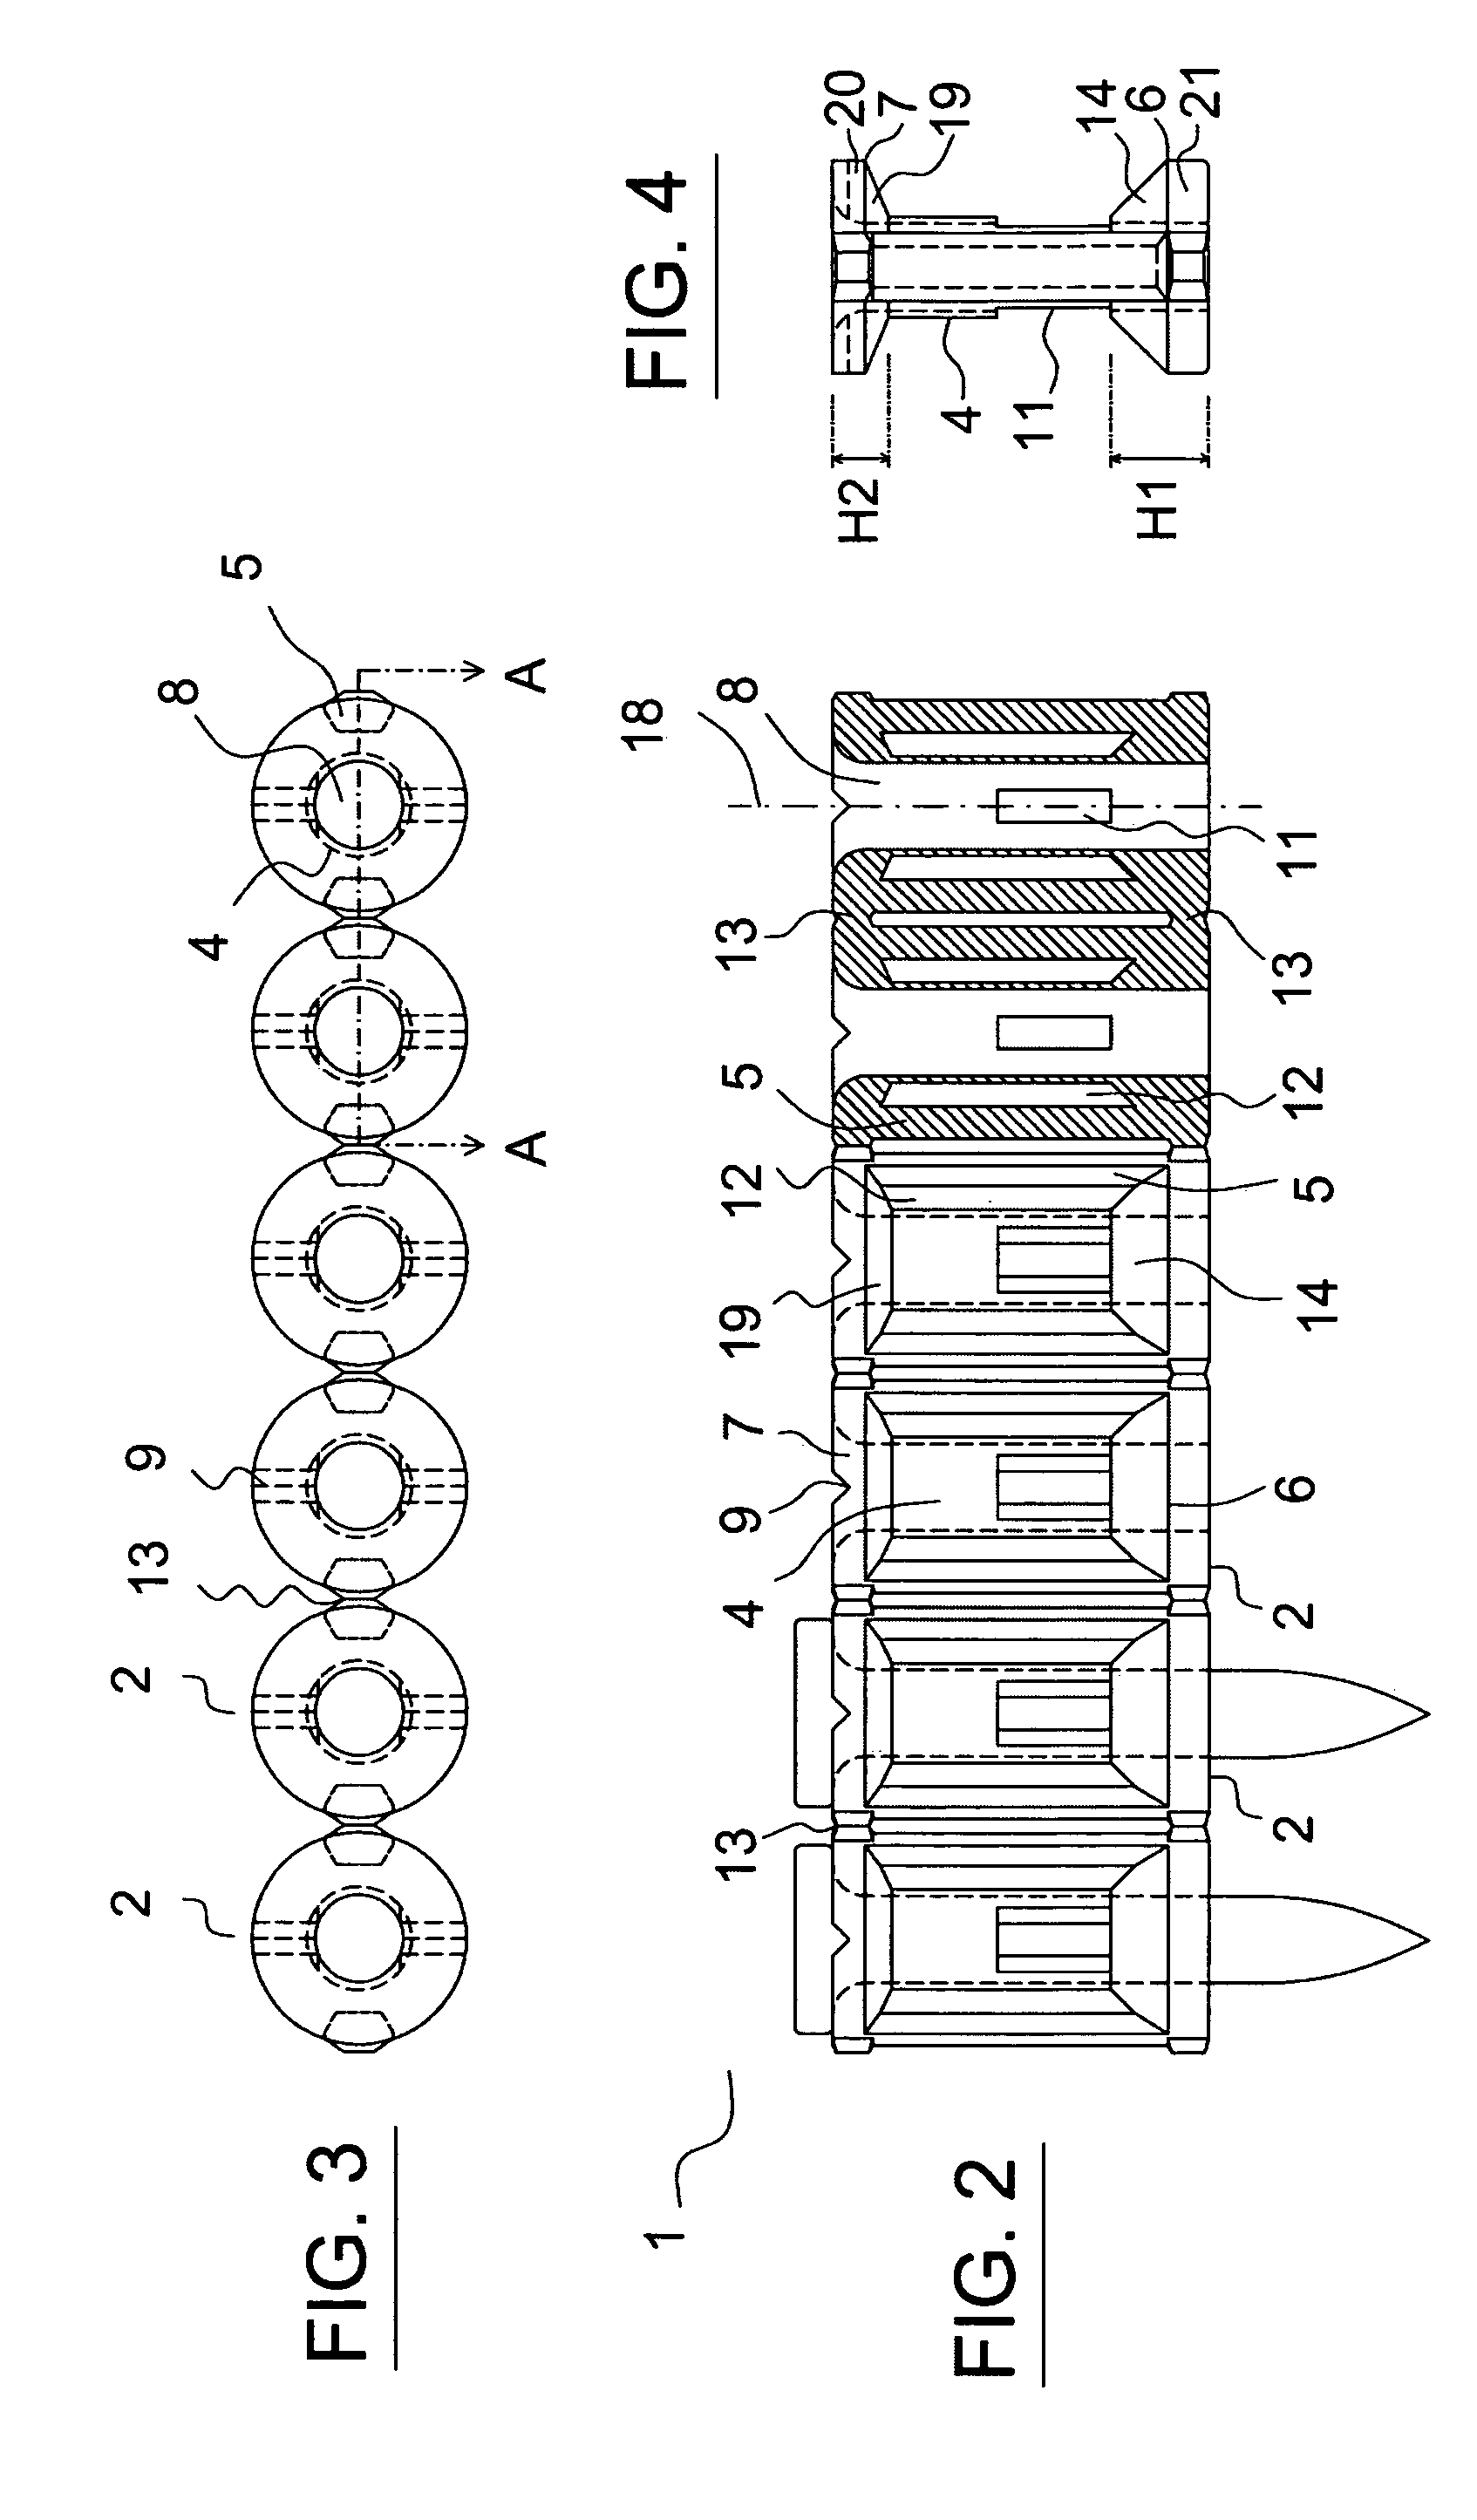 Carrier strip for nails or other securing elements